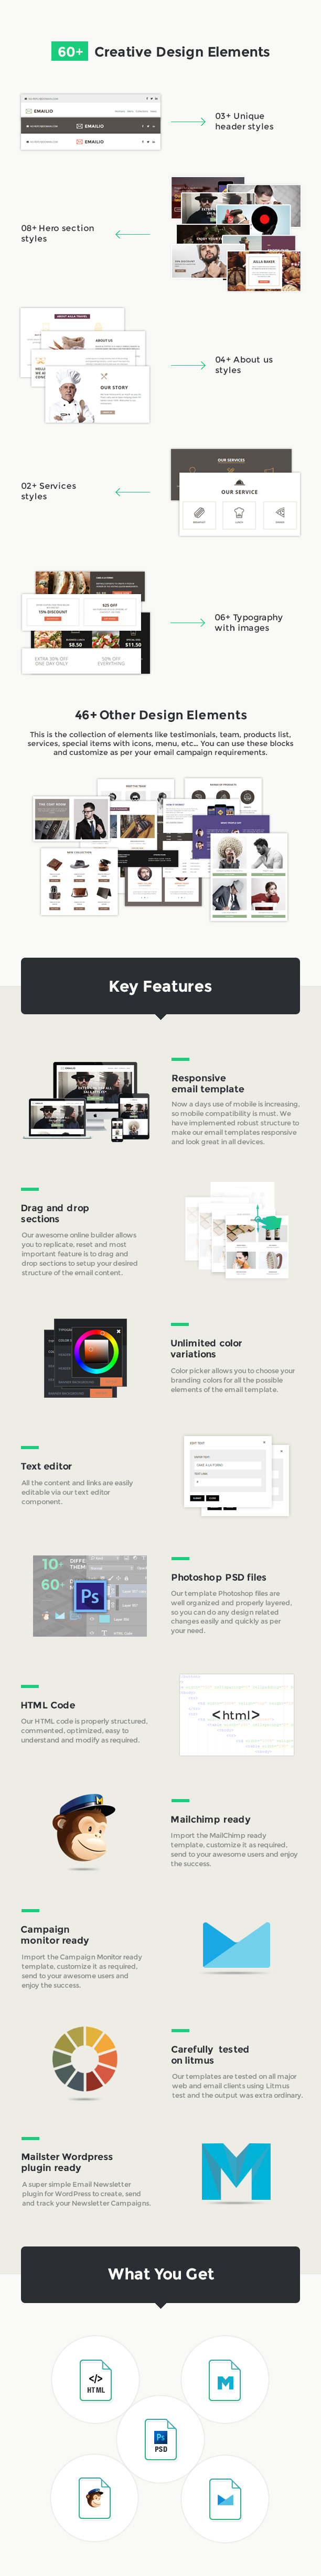 presentation4 new - Emailio Responsive Multipurpose Email Template With Online Builder